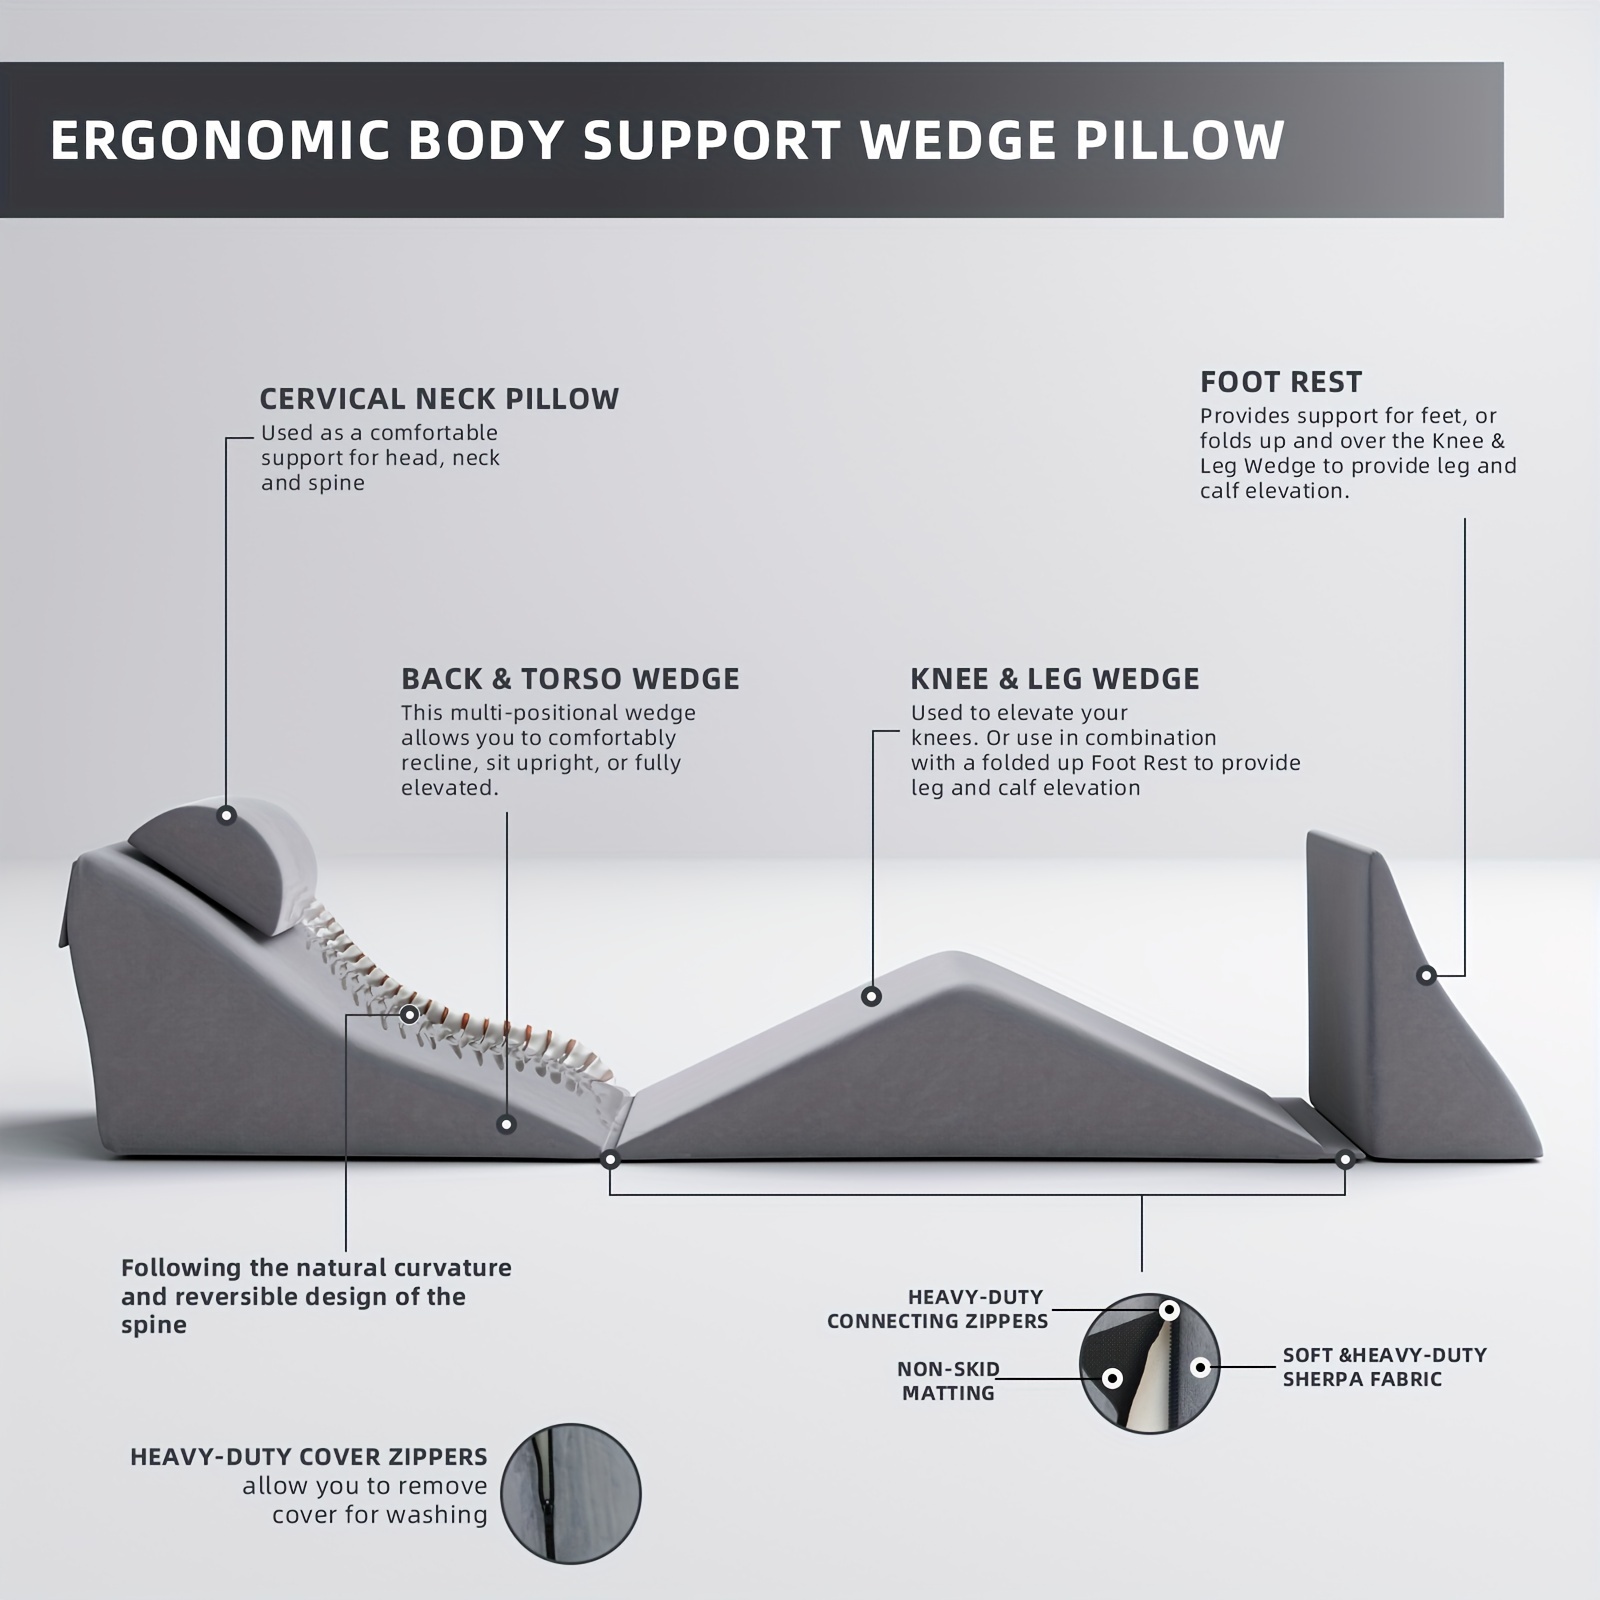 Adjustable Leg Elevation Pillows for Swelling After Surgery, Cooling Memory Foam Leg Wedge Pillow for Blood Circulation, Wedge Pillow for Sleeping